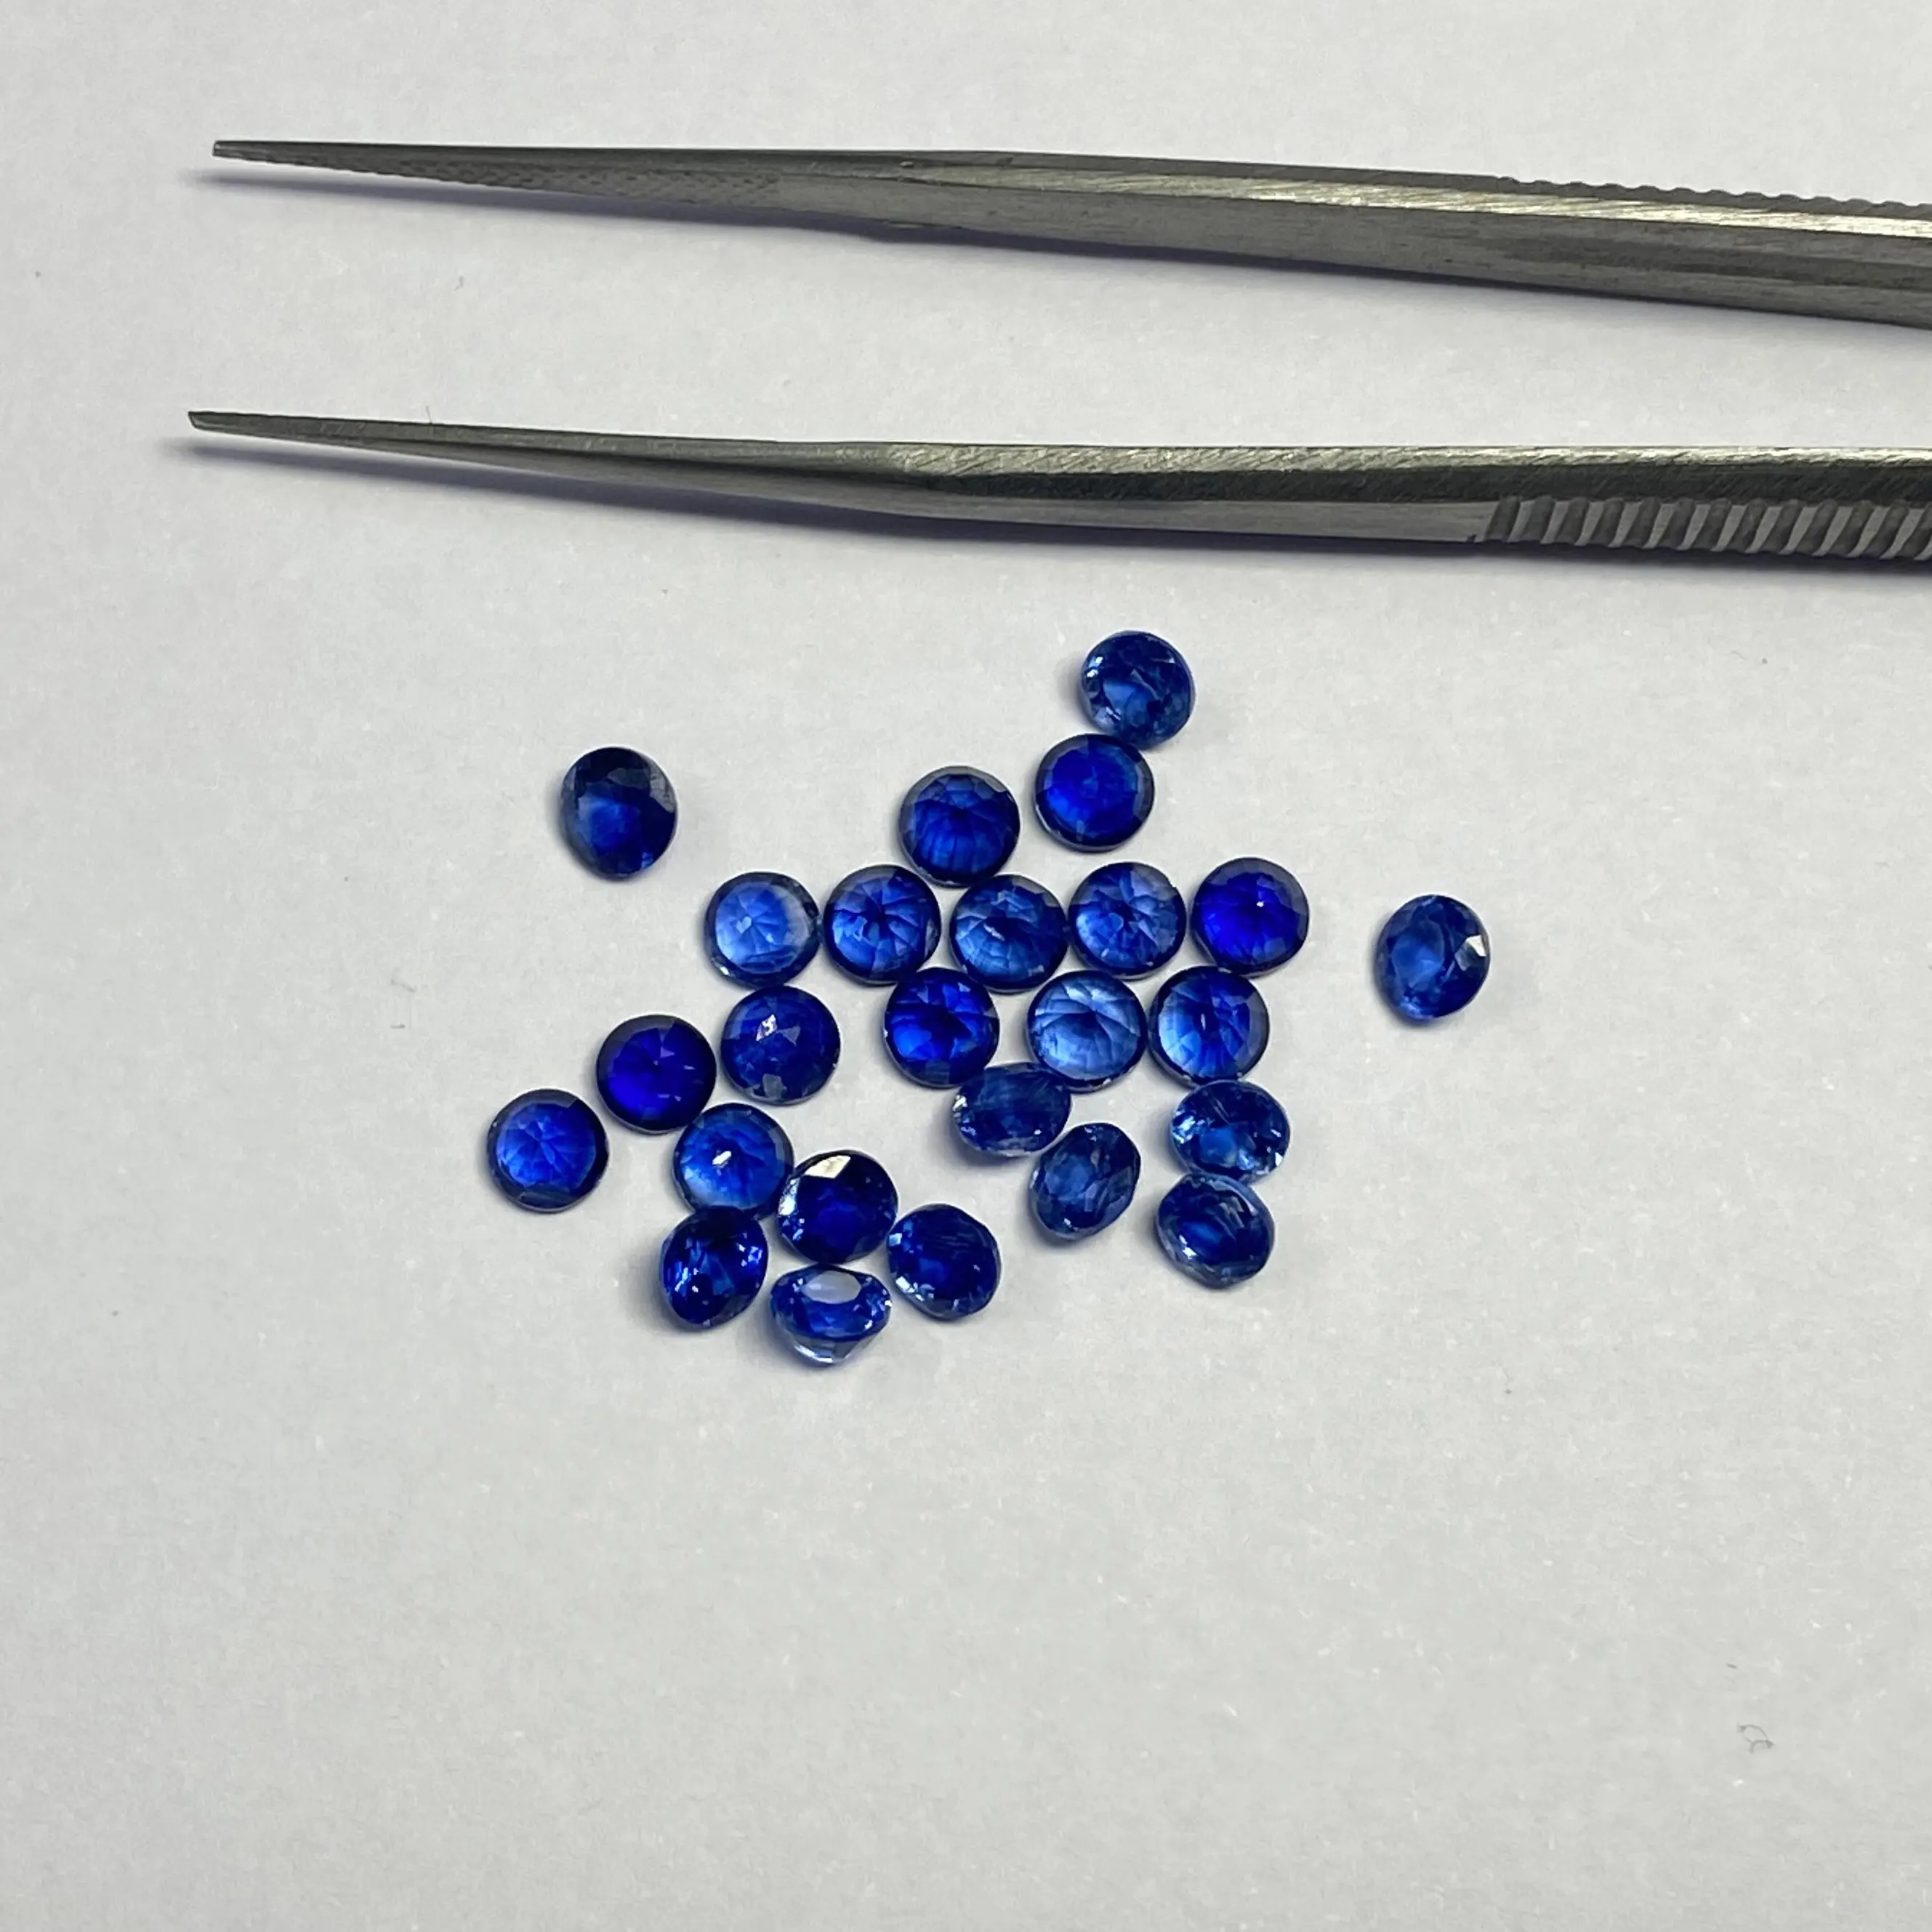 AAA Quality Lowest Price Faceted Round Cut Natural 4.5mm Blue Kyanite Semi Precious Loose Gemstone At Wholesale Price